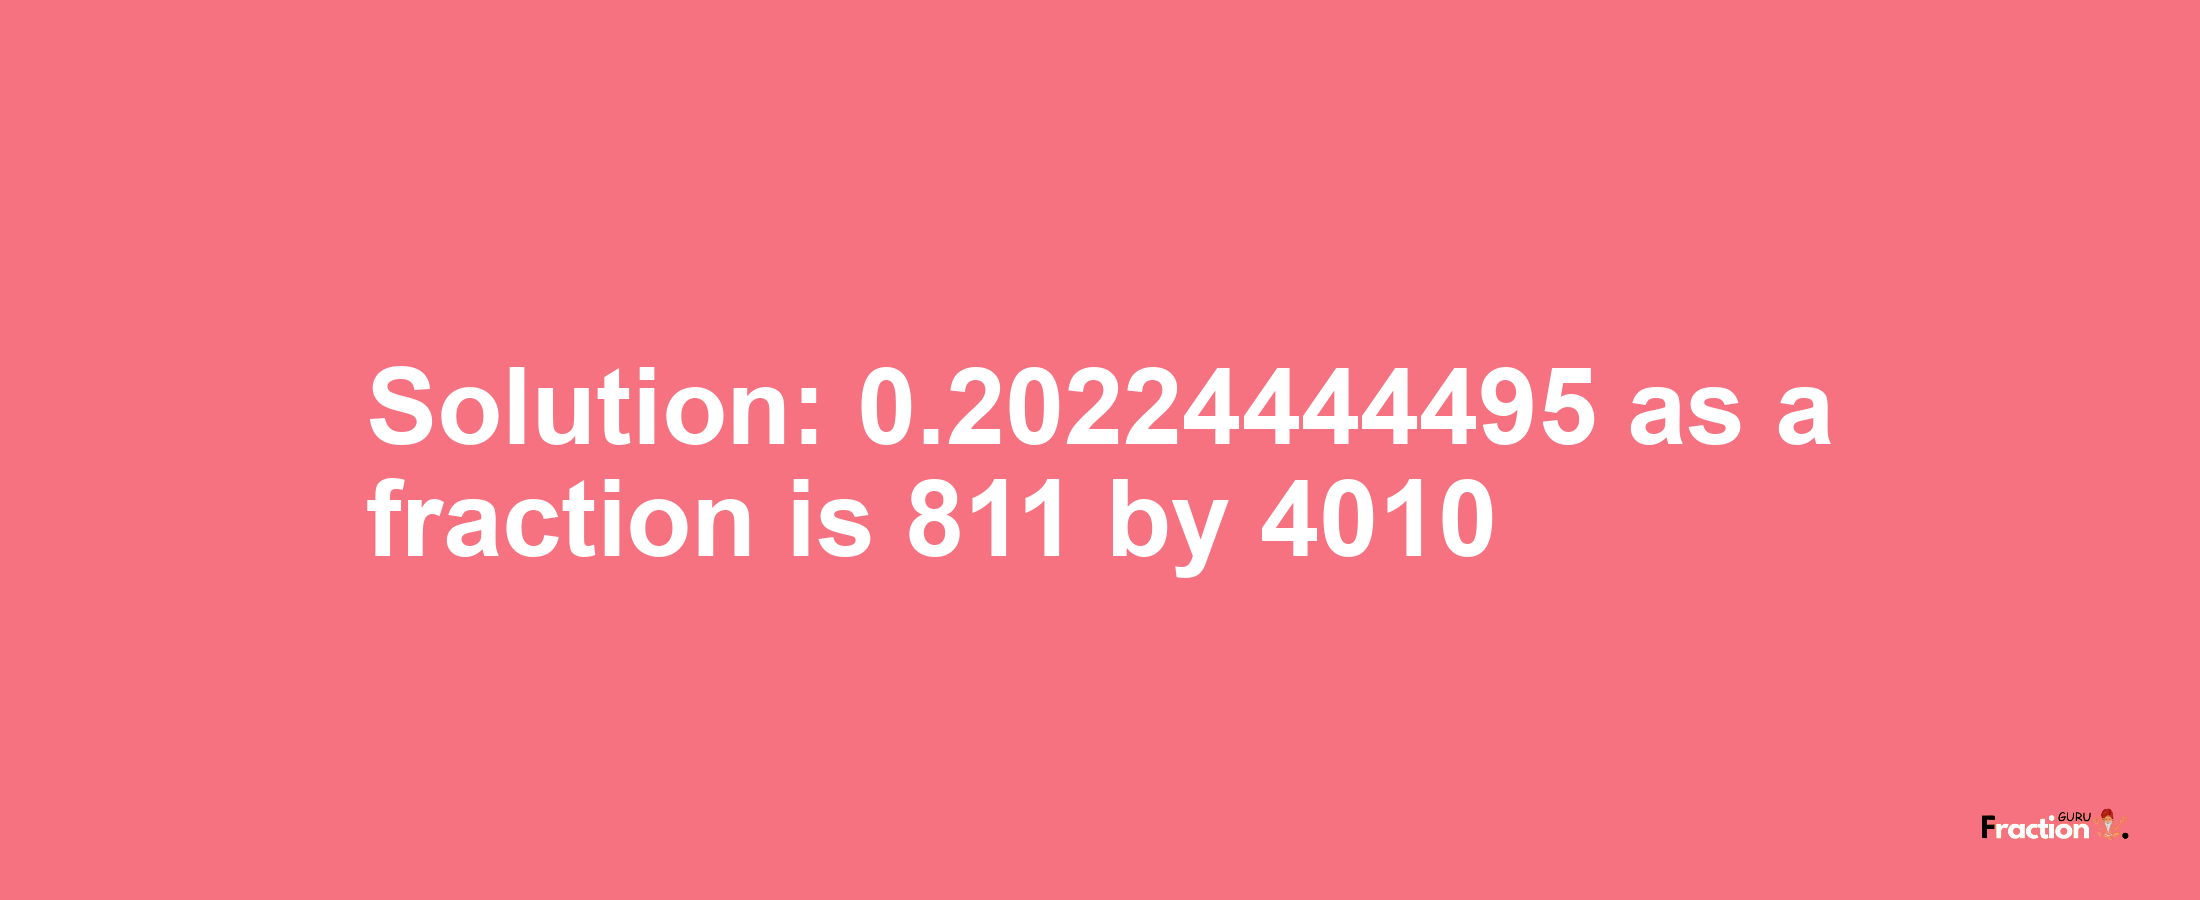 Solution:0.20224444495 as a fraction is 811/4010